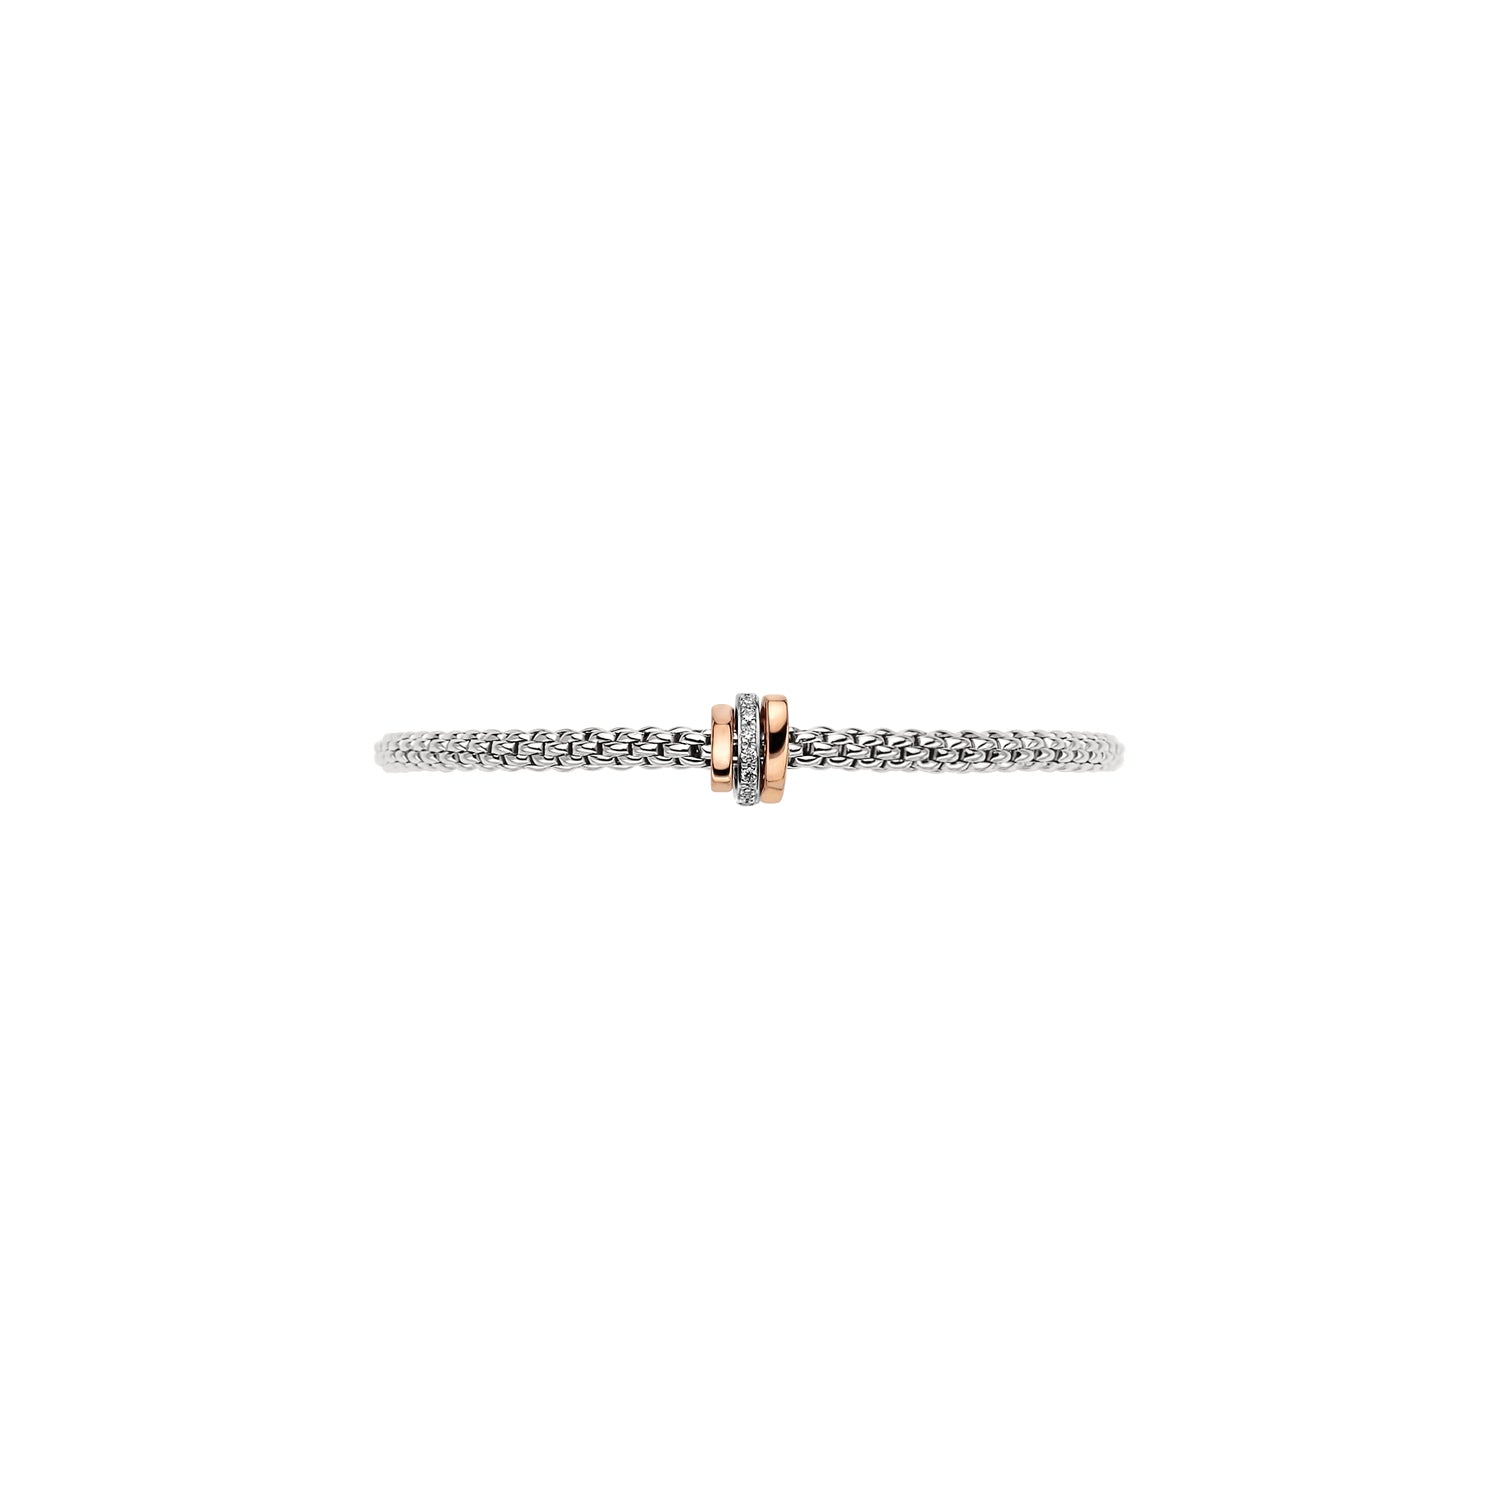 Flex'it Prima bracelet with diamonds in white and rose gold